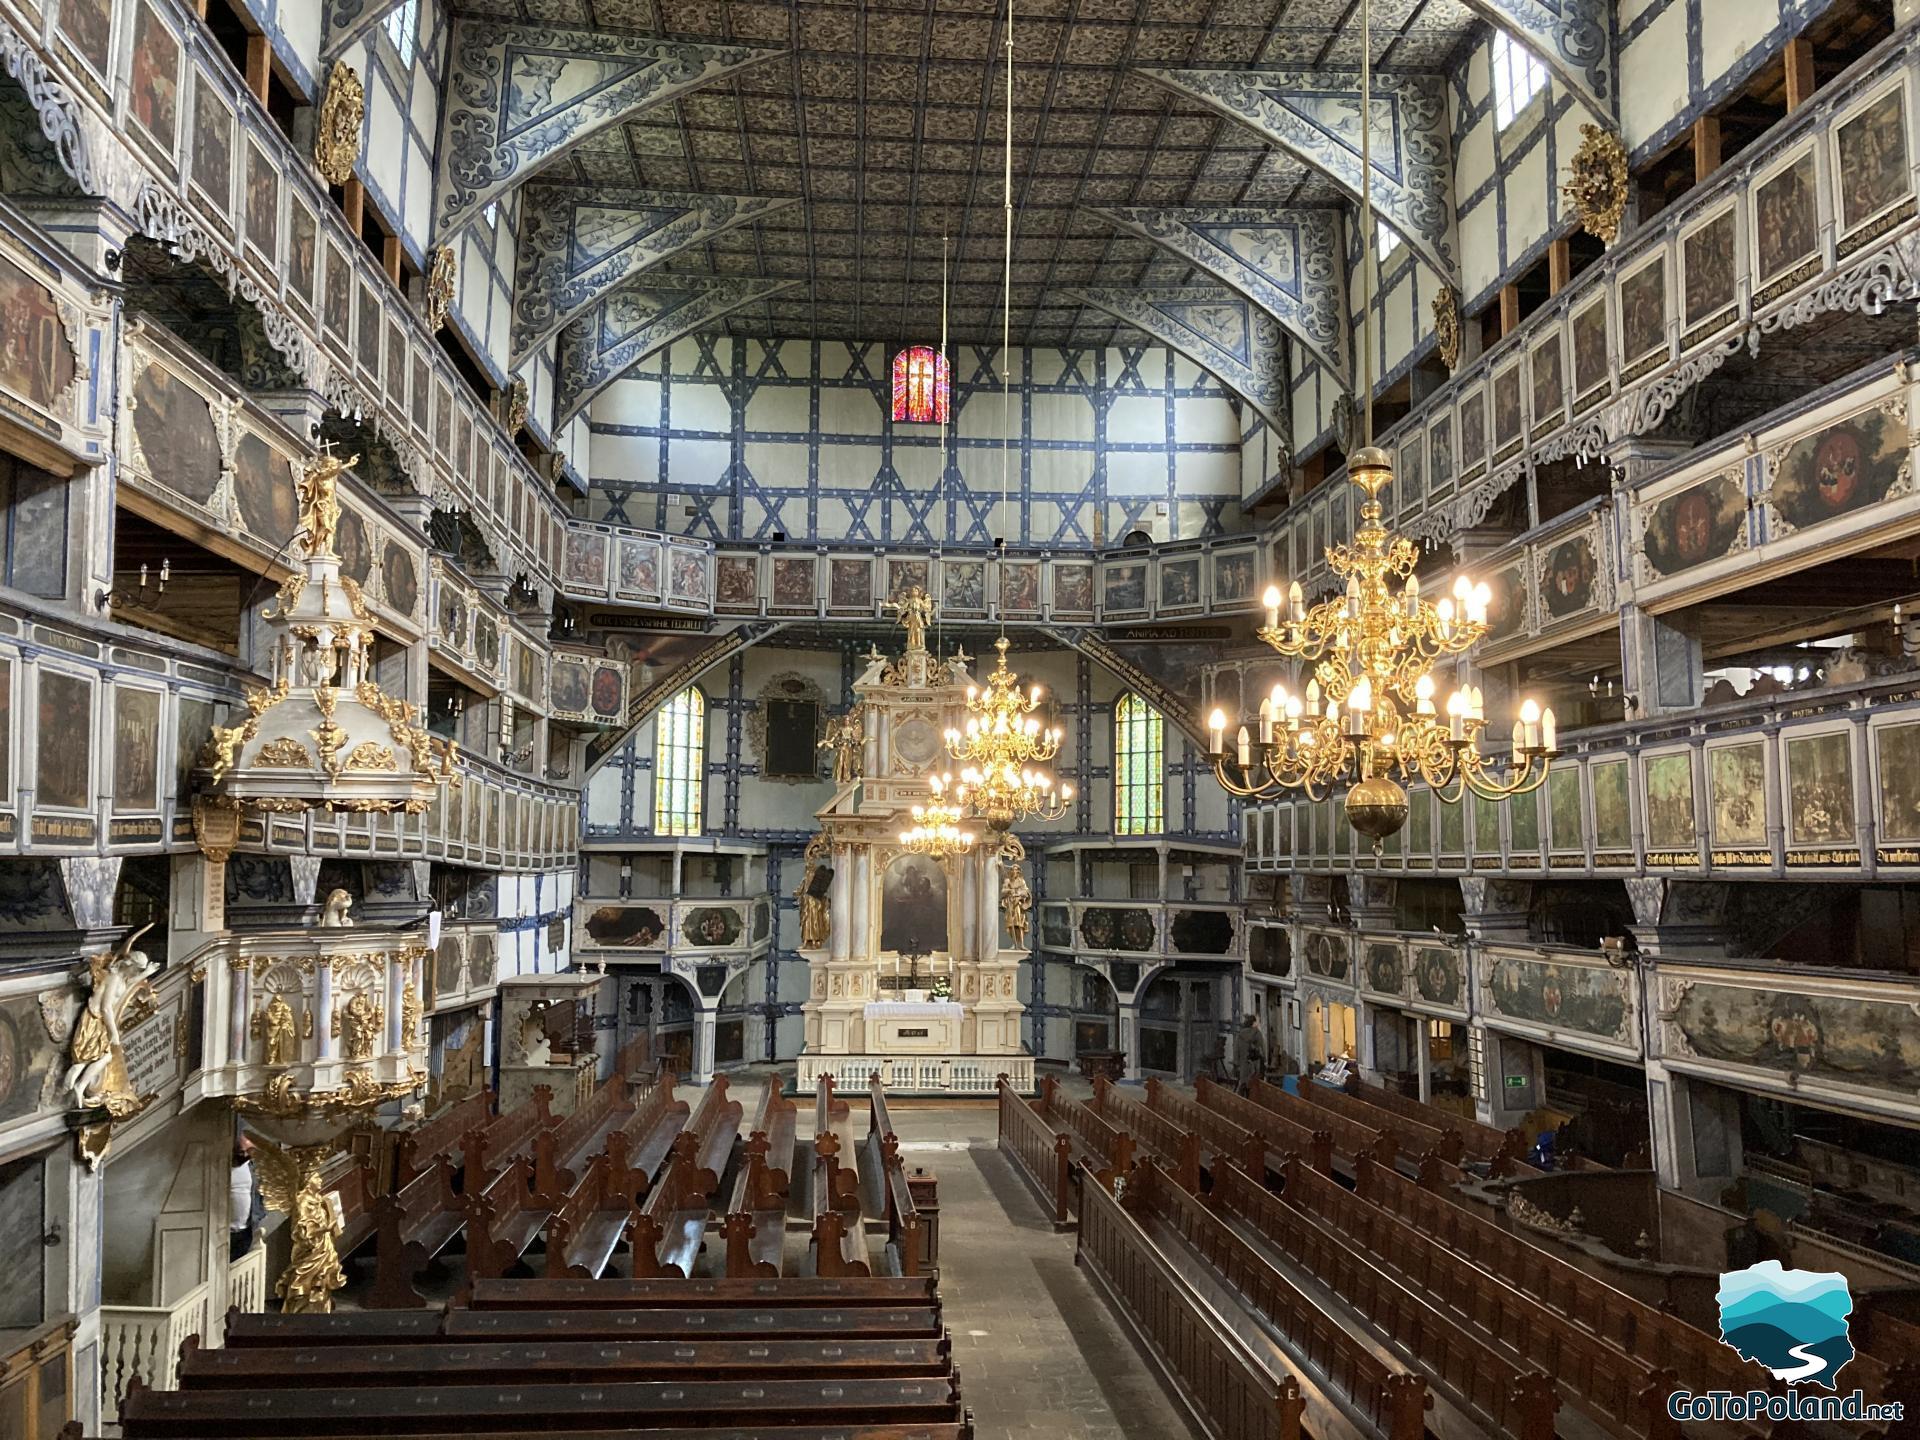 an interior of a wooden church, rows of pews